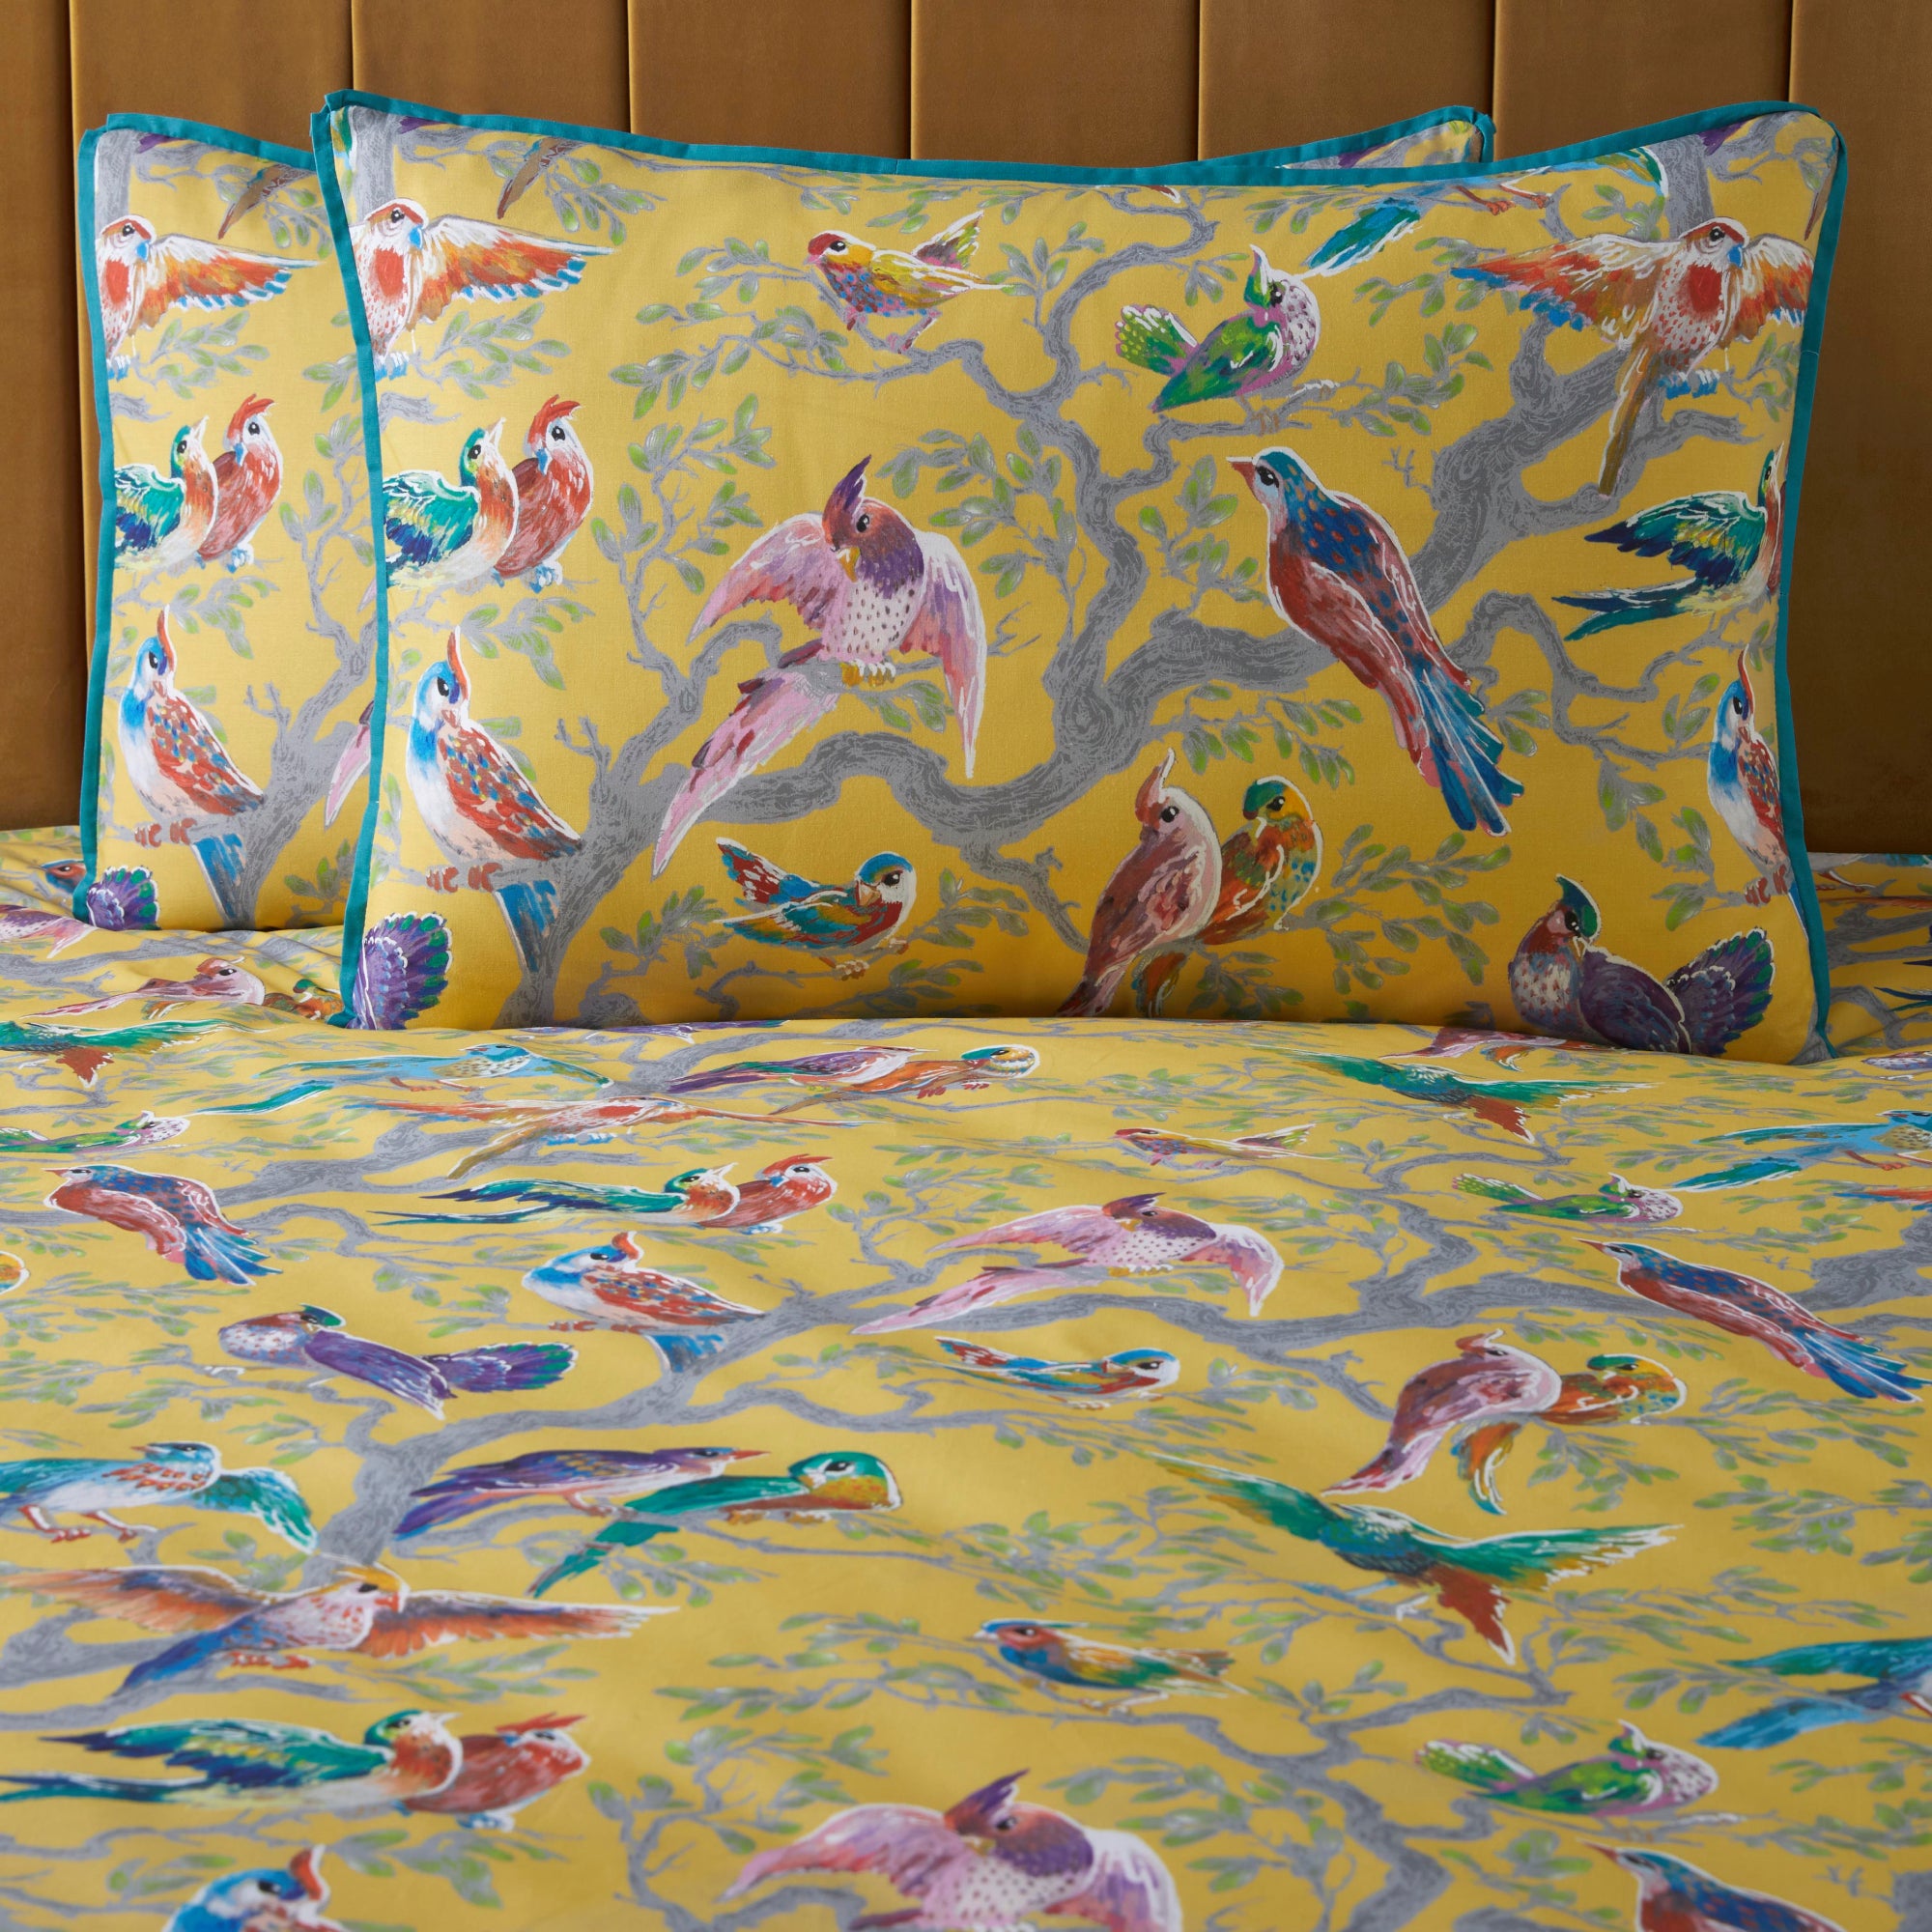 Duvet Cover Set Birdity Absurdity by Laurence Llewelyn-Bowen in Yellow